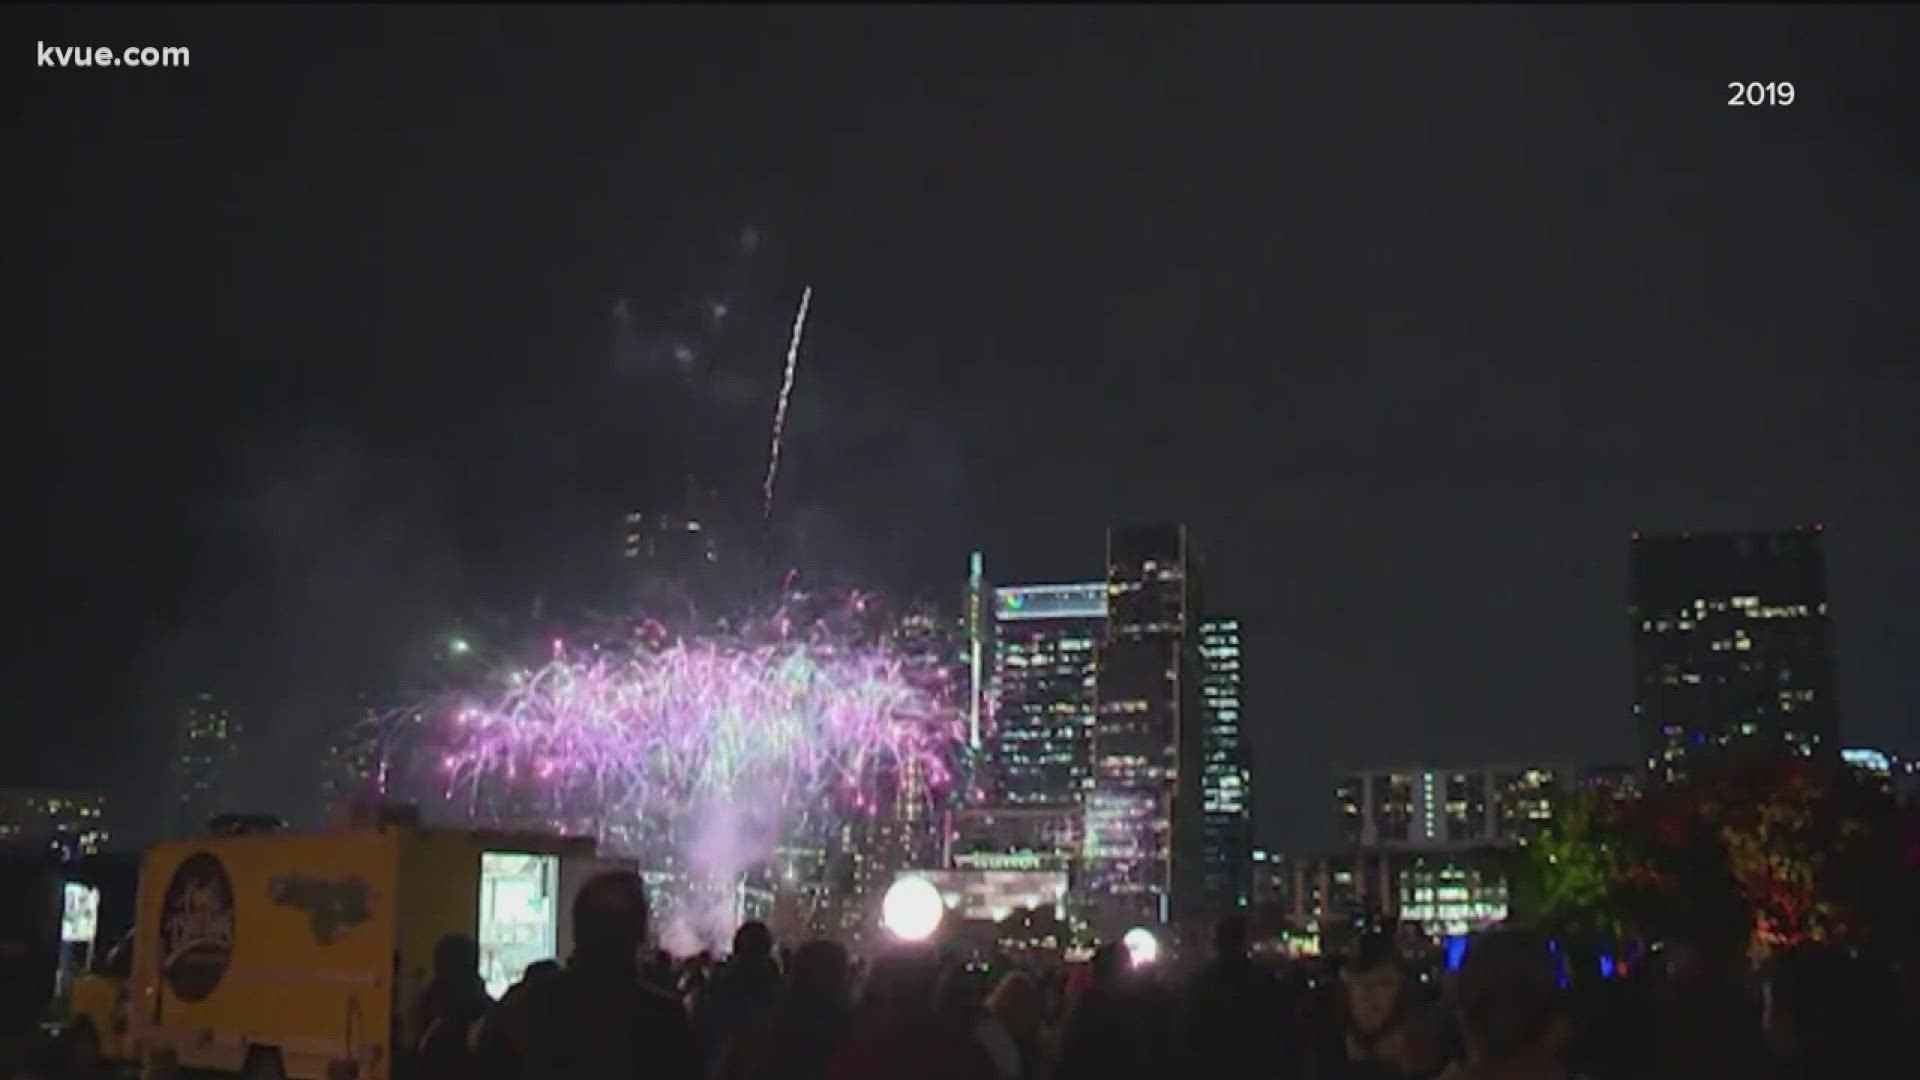 If you're looking to celebrate the new year, you could check out some fireworks, midnights toasts or drive-in movies.